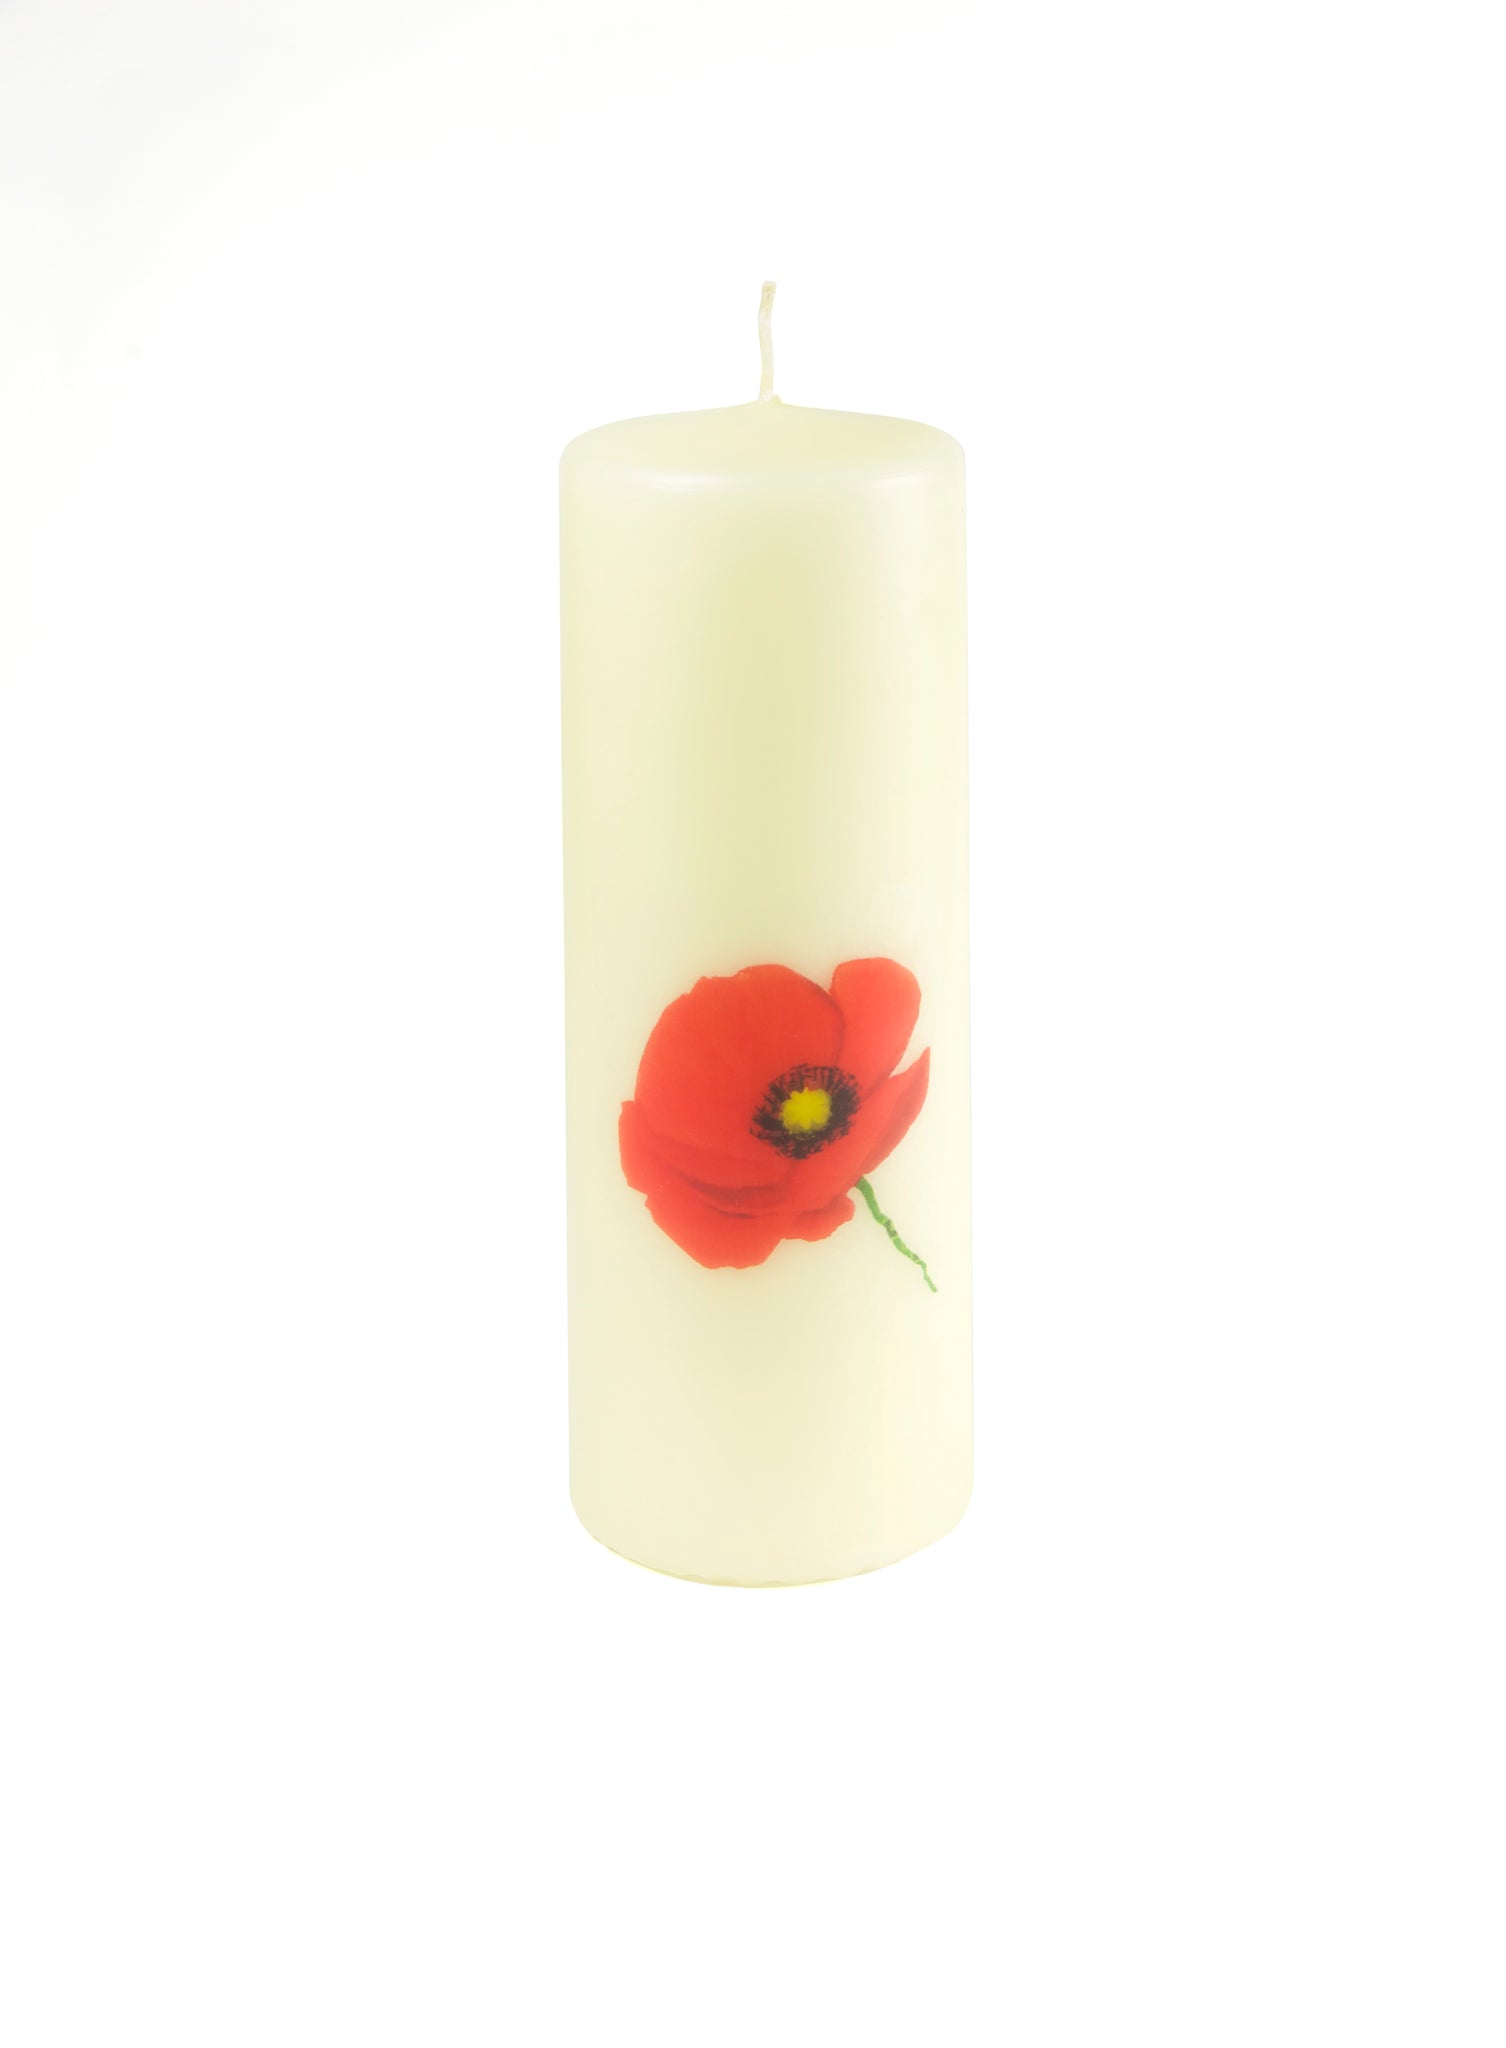 Exclusive Km Candle With Poppy Design (New) 8" X  2 6/8"   (2907)Exclusive Km Candle With Poppy Design (New) 8" X  2 6/8"   (2907)